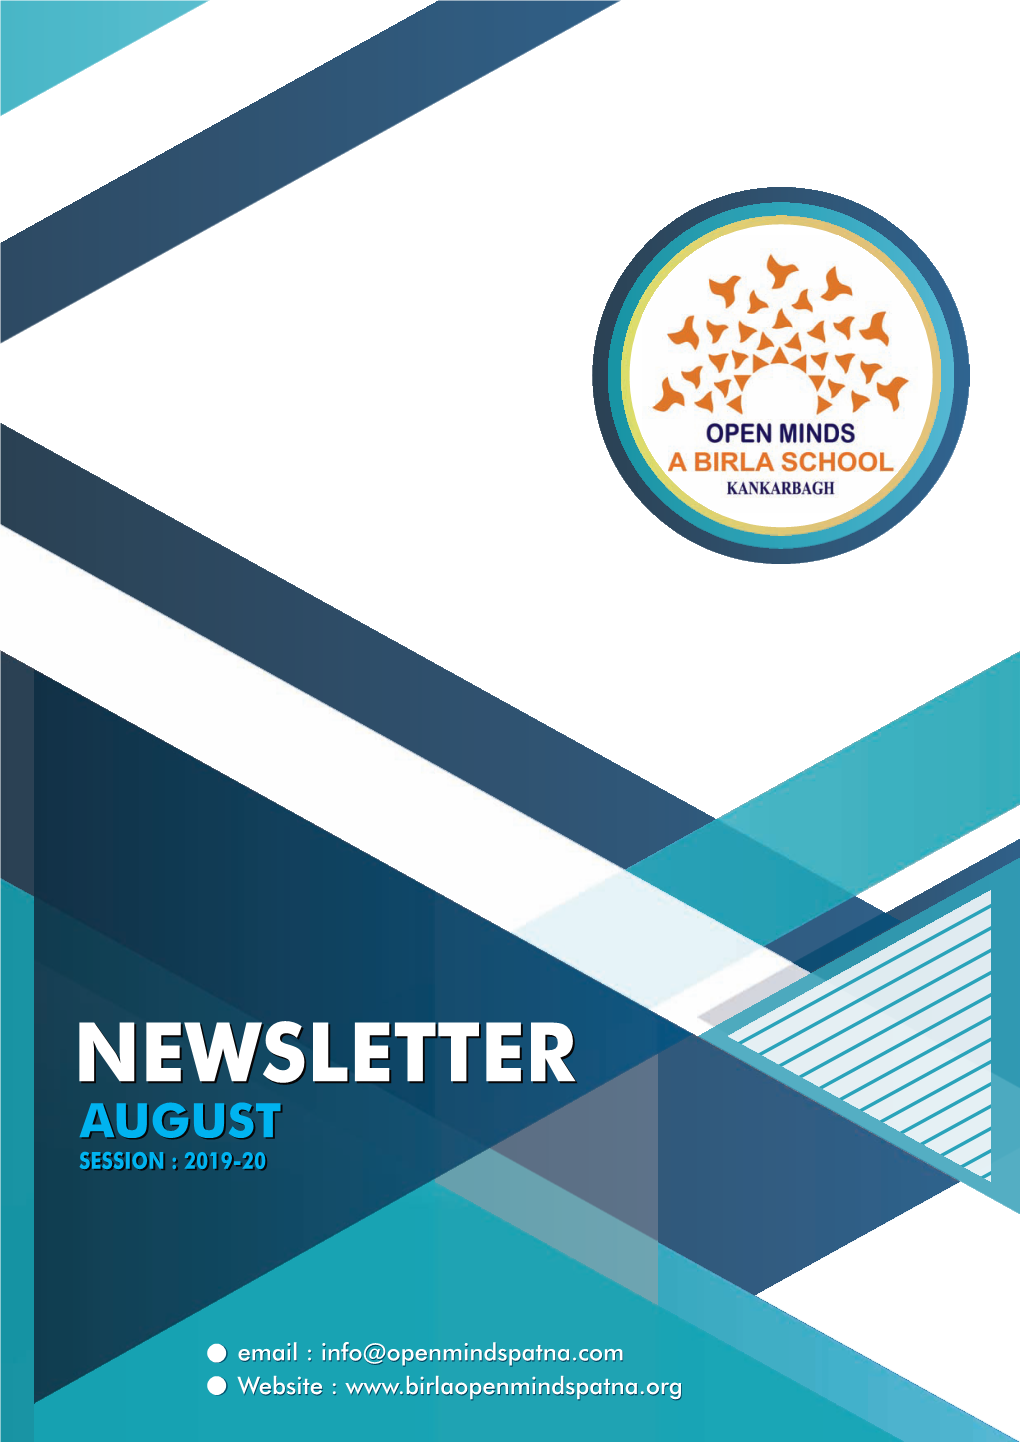 NEWS LETTER AUGUST 2019-20.Cdr